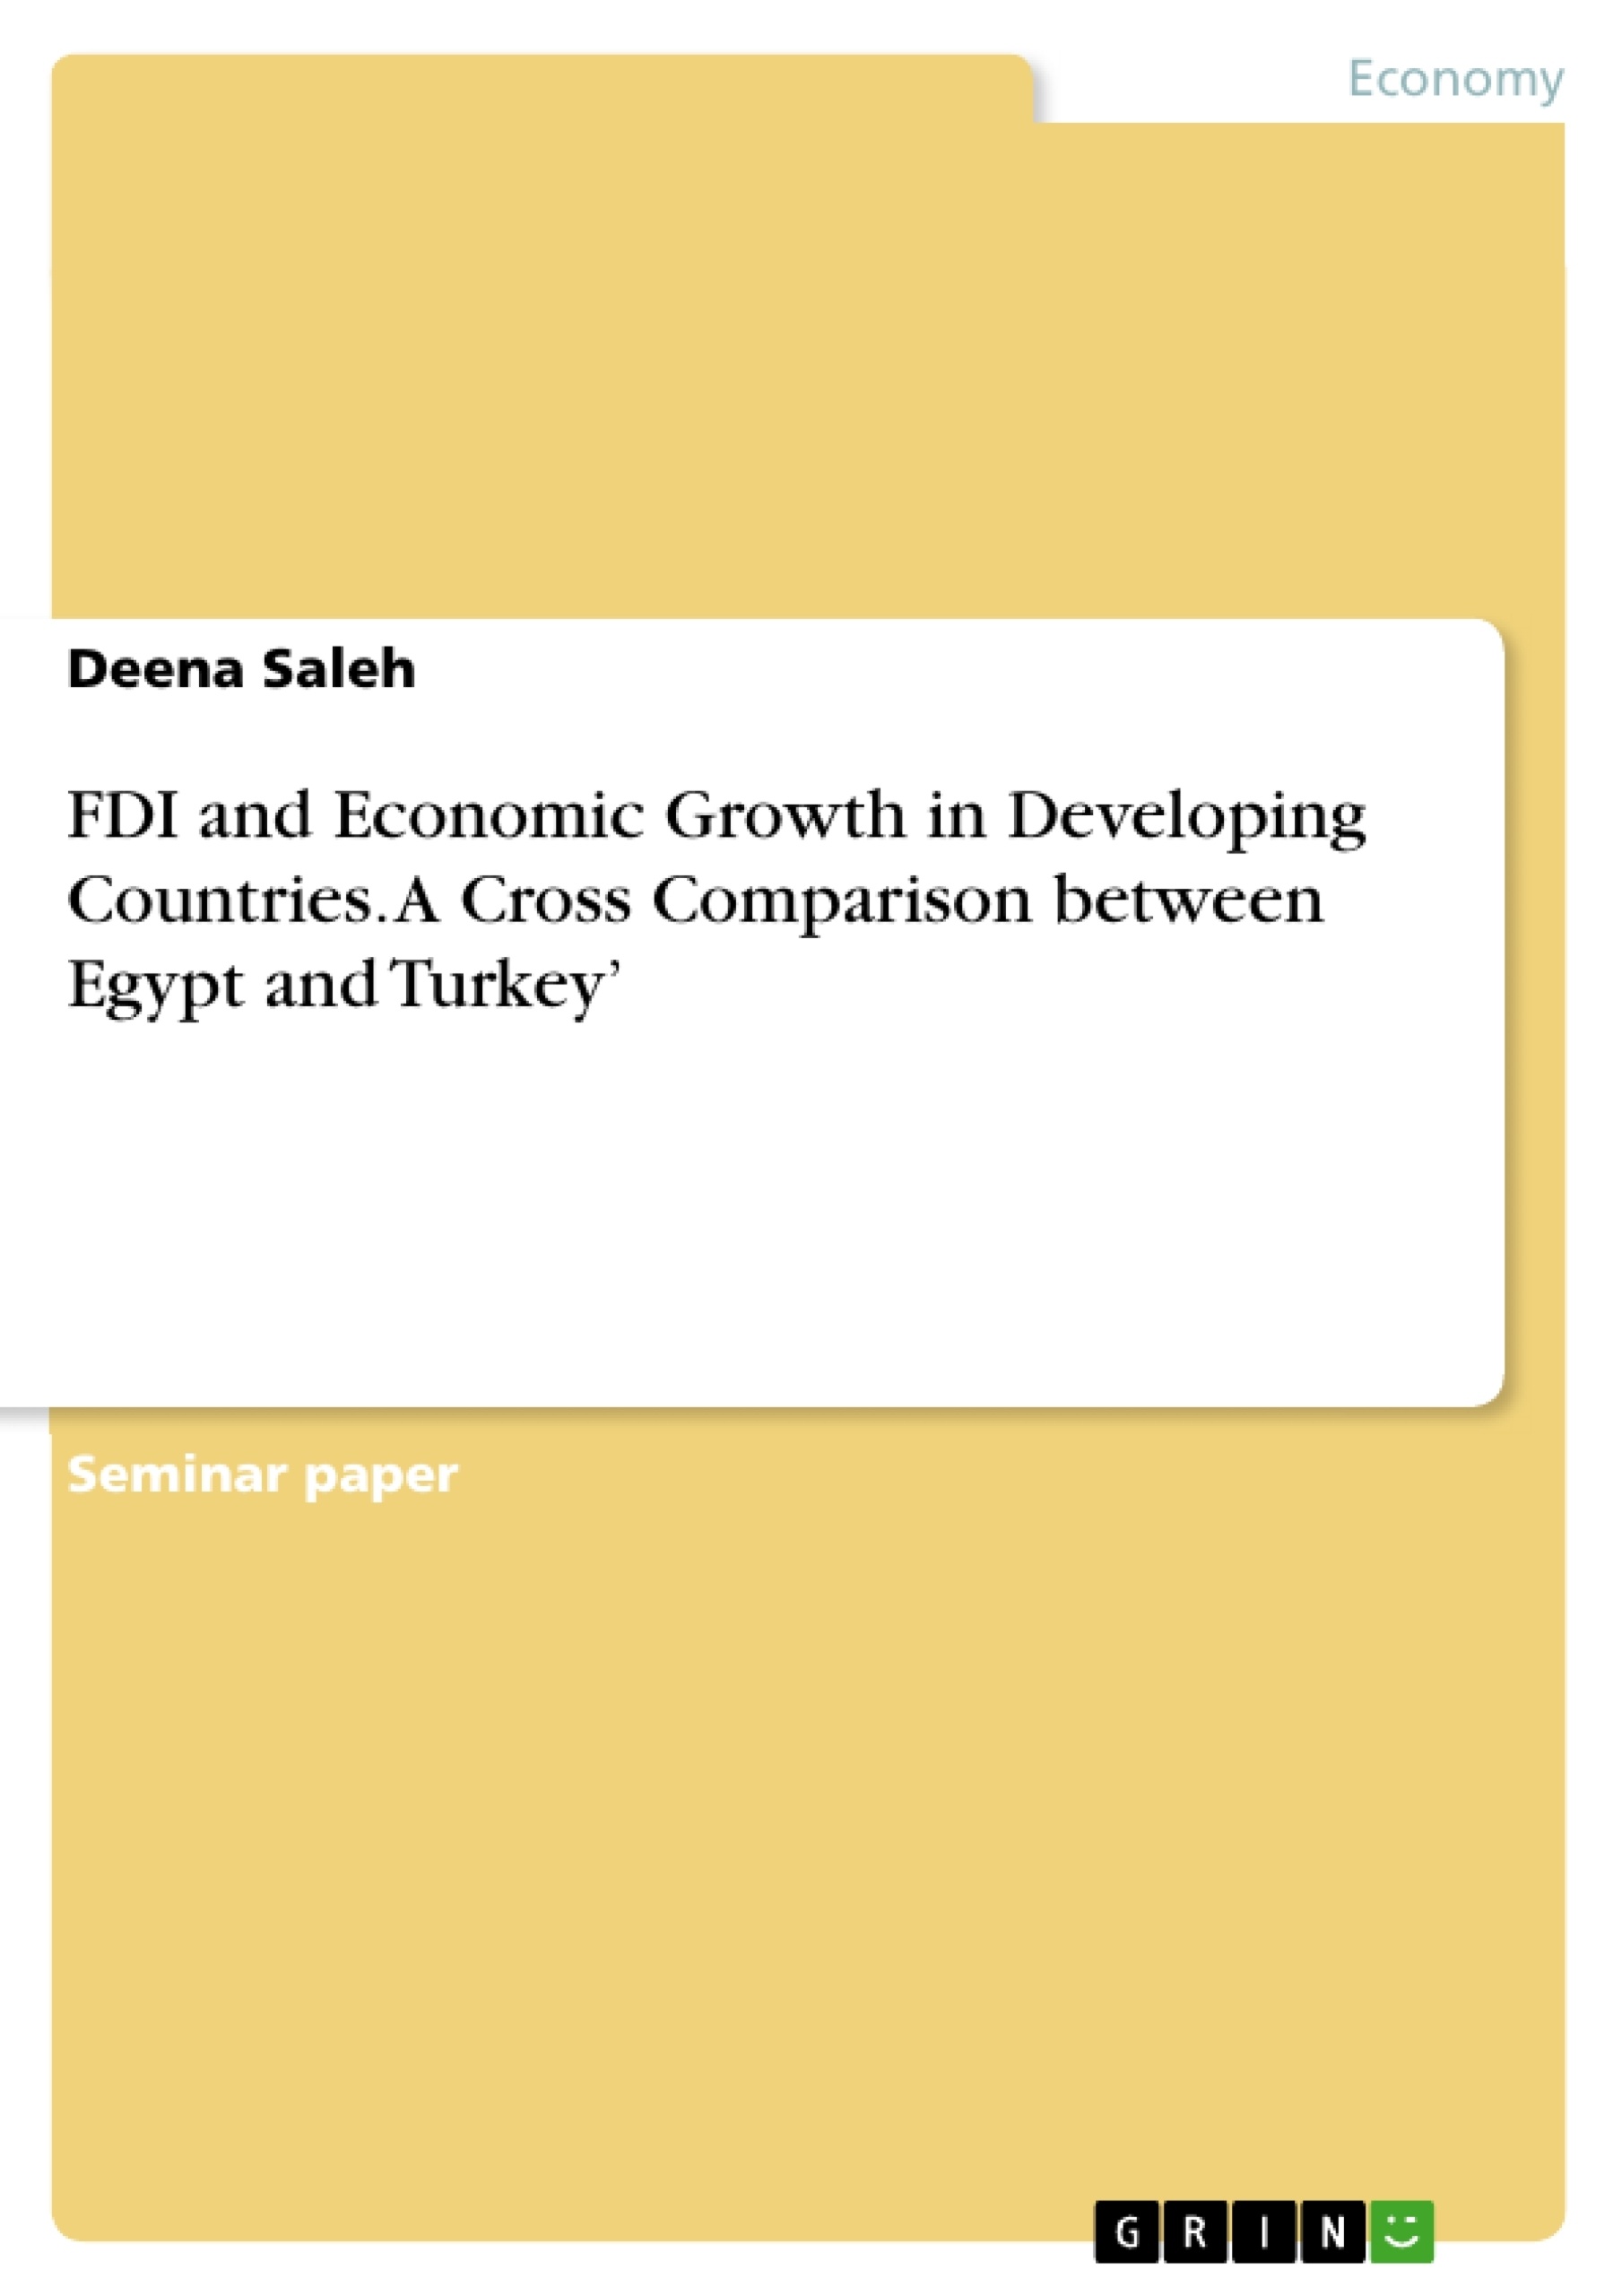 Title: FDI and Economic Growth in Developing Countries. A Cross Comparison between Egypt and Turkey’